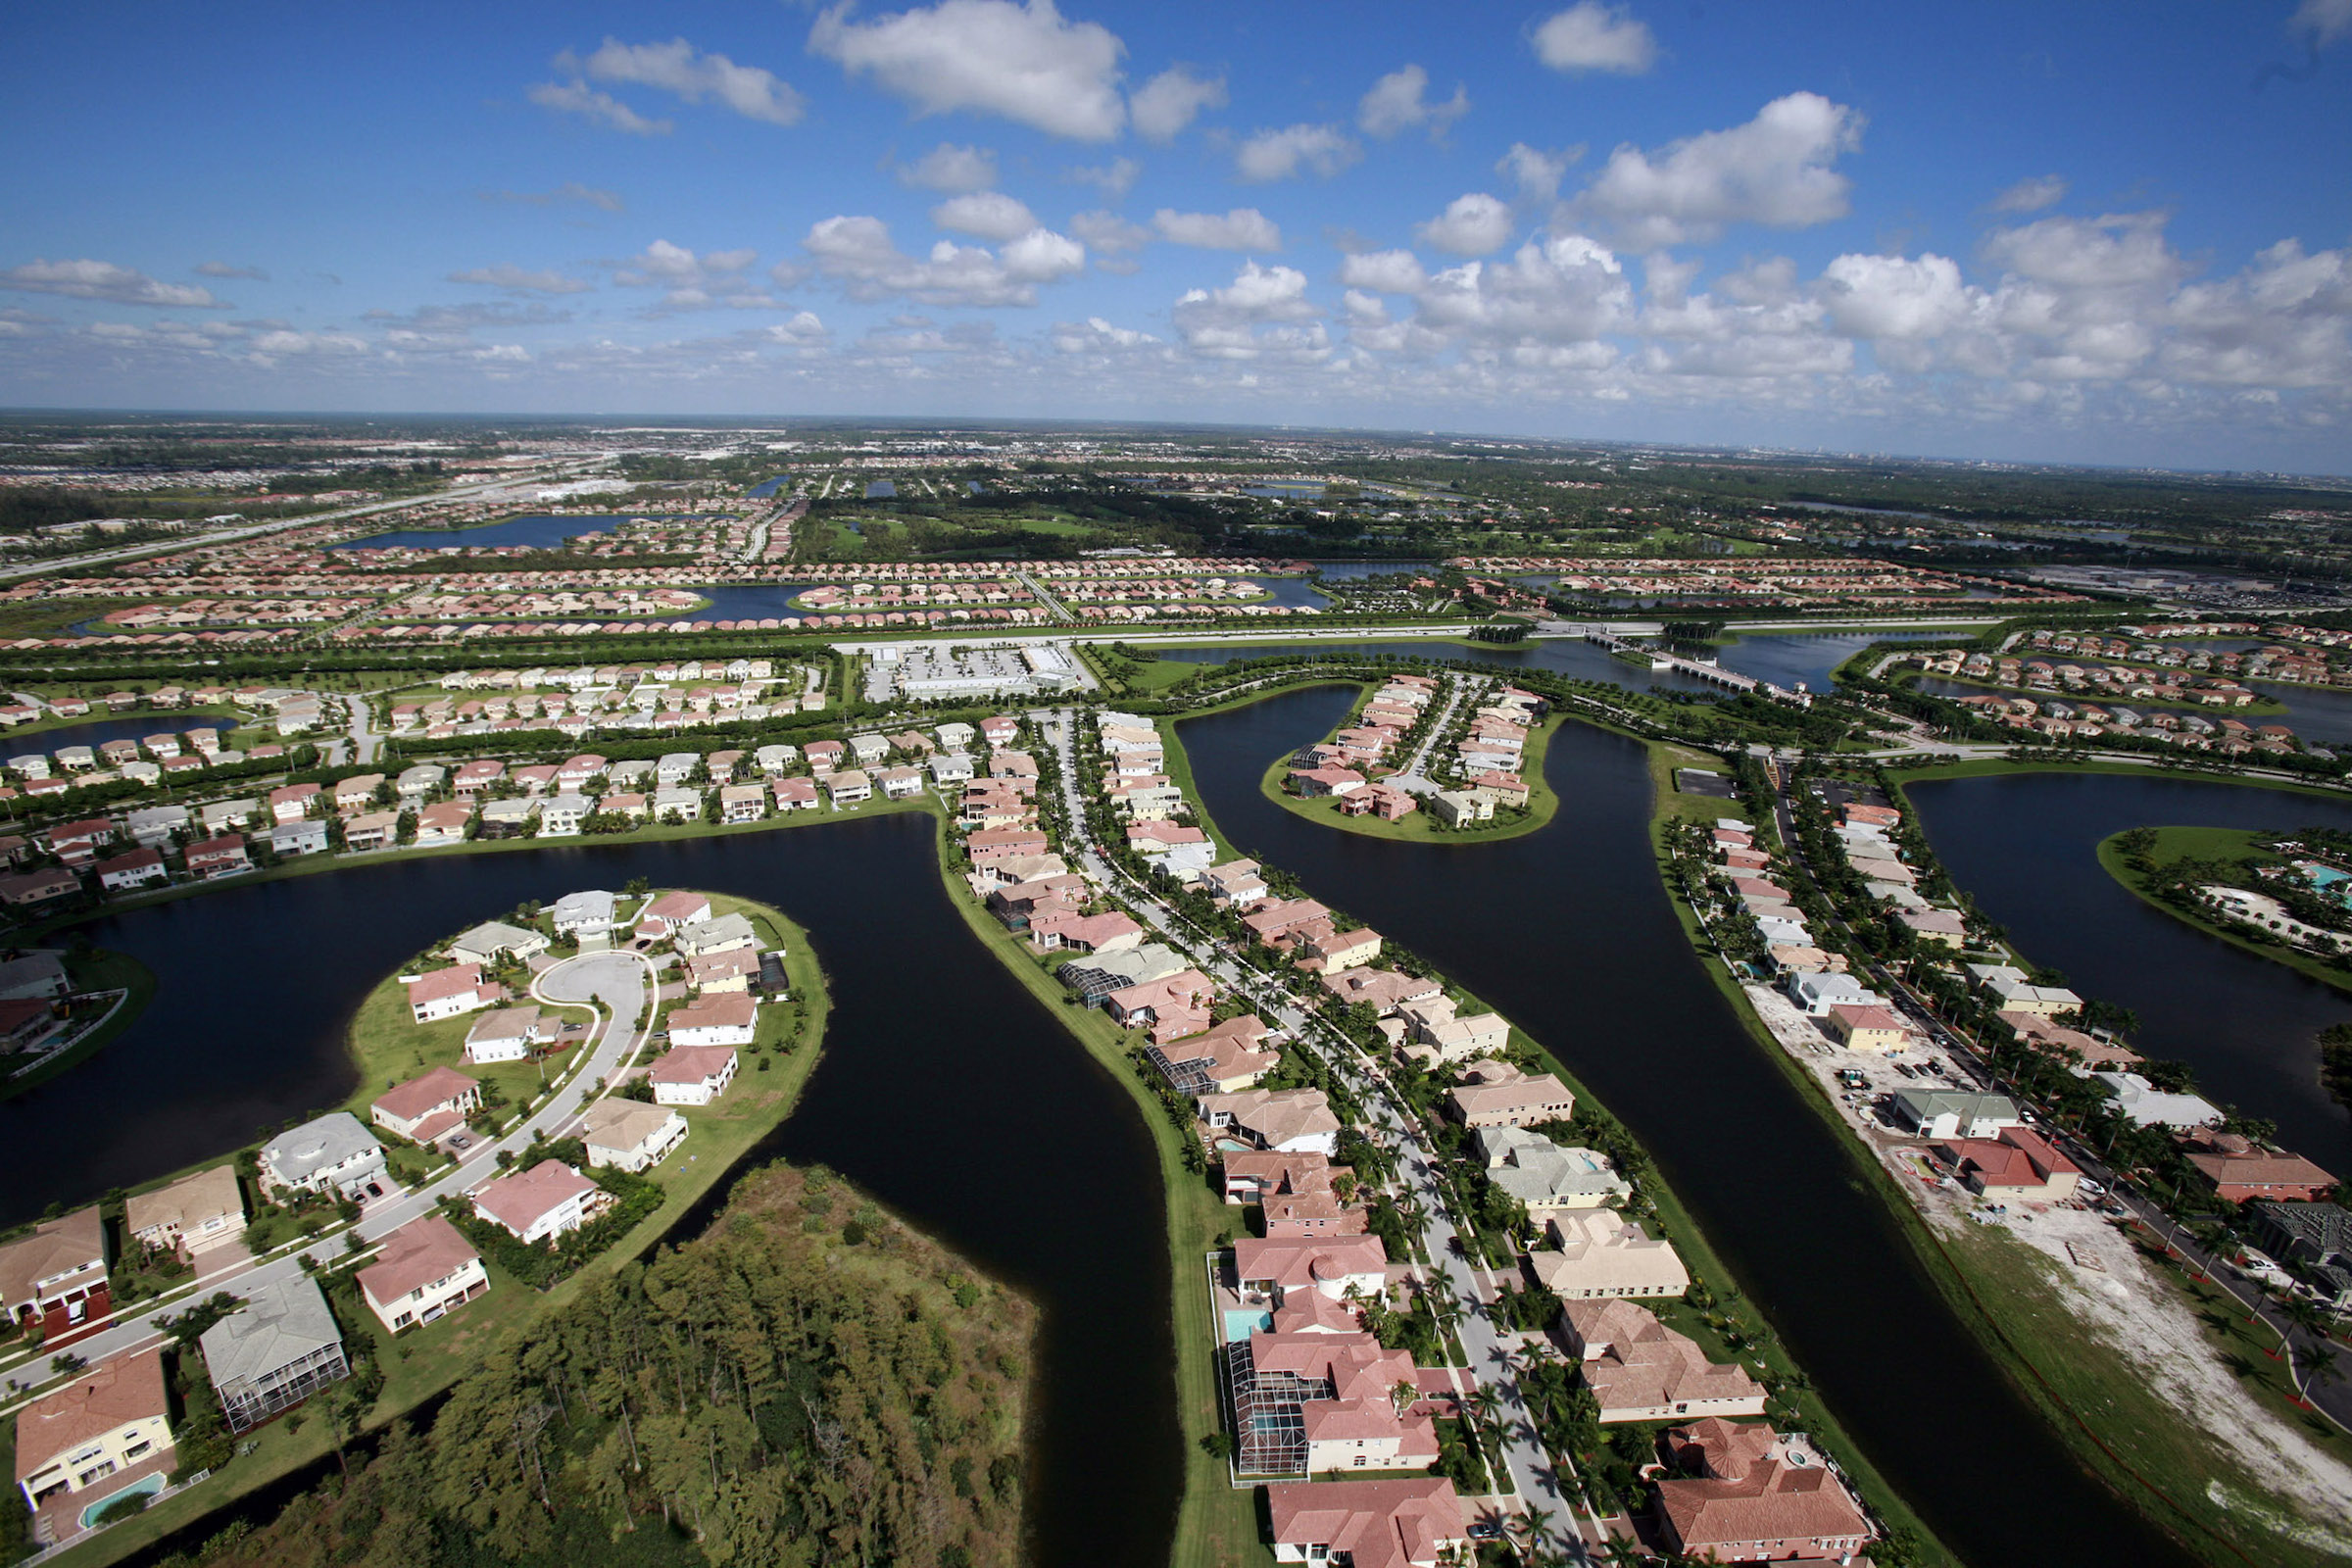 An aerial view of housing developments located near the northern part of the Everglades in Palm Beach county, Fla., Oct. 23, 2007. Thousands of acres of wetlands and wildlife habitat continue to disappear, paved by developers or blasted by rock miners to feed the hungry construction industry. (Barbara P. Fernandez—The New York Times/Redux)